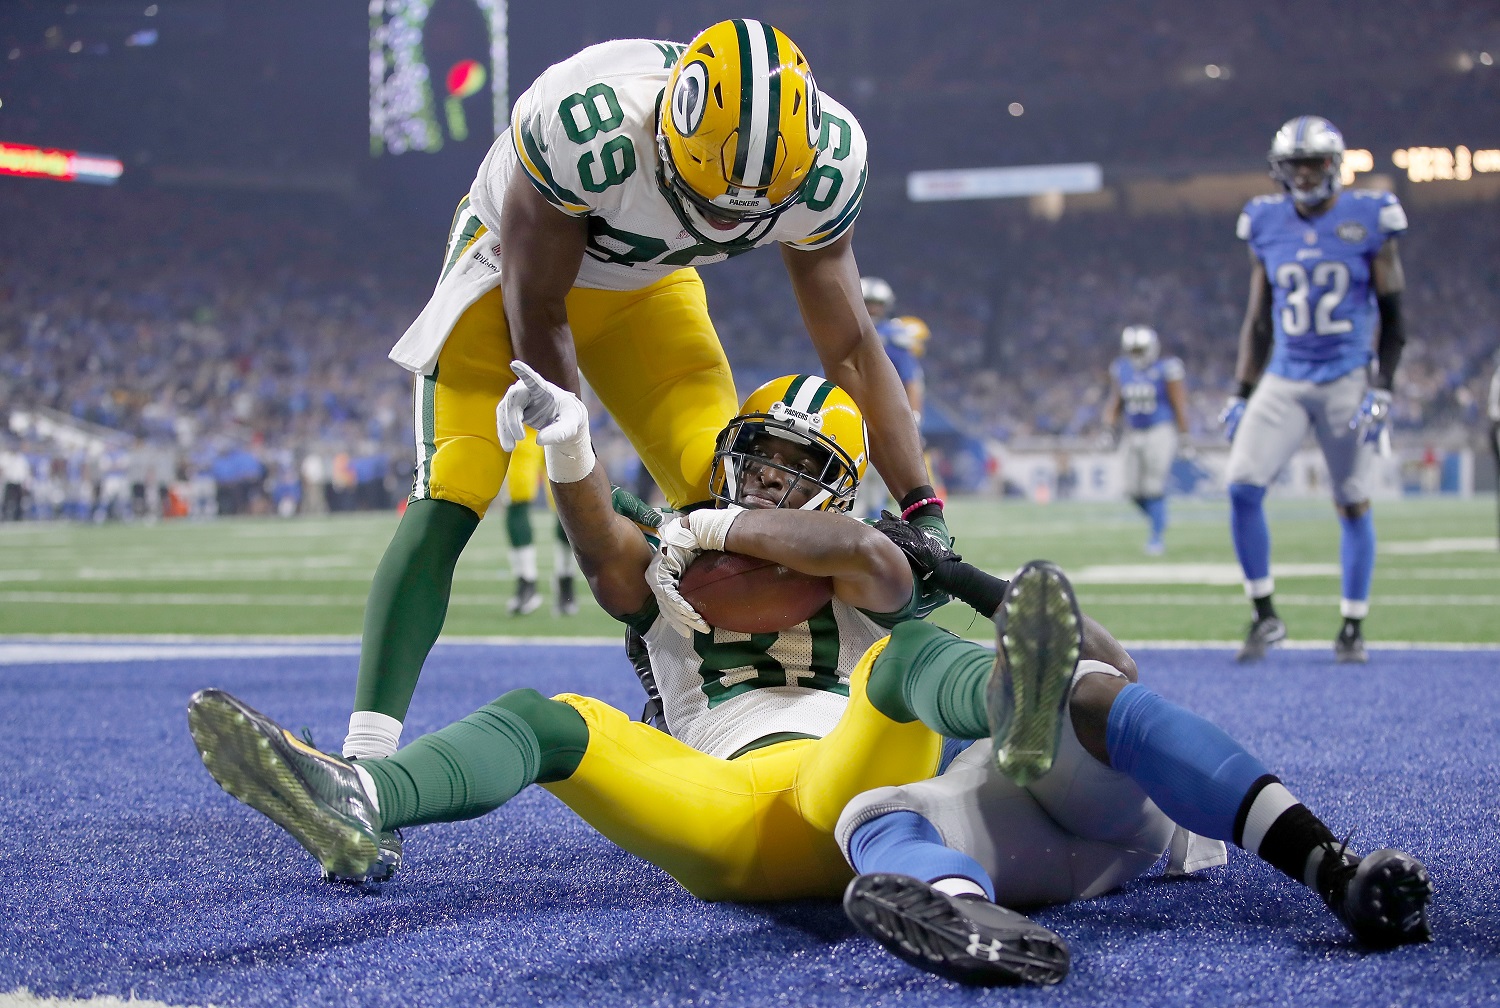 DETROIT, MI - JANUARY 1: Geronimo Allison #81 of the Green Bay Packers celebrates his touchdown catch with teammate Jared Cook #89 against the Detroit Lions during fourth quarter at Ford Field on January 1, 2017 in Detroit, Michigan (Photo by Gregory Shamus/Getty Images)